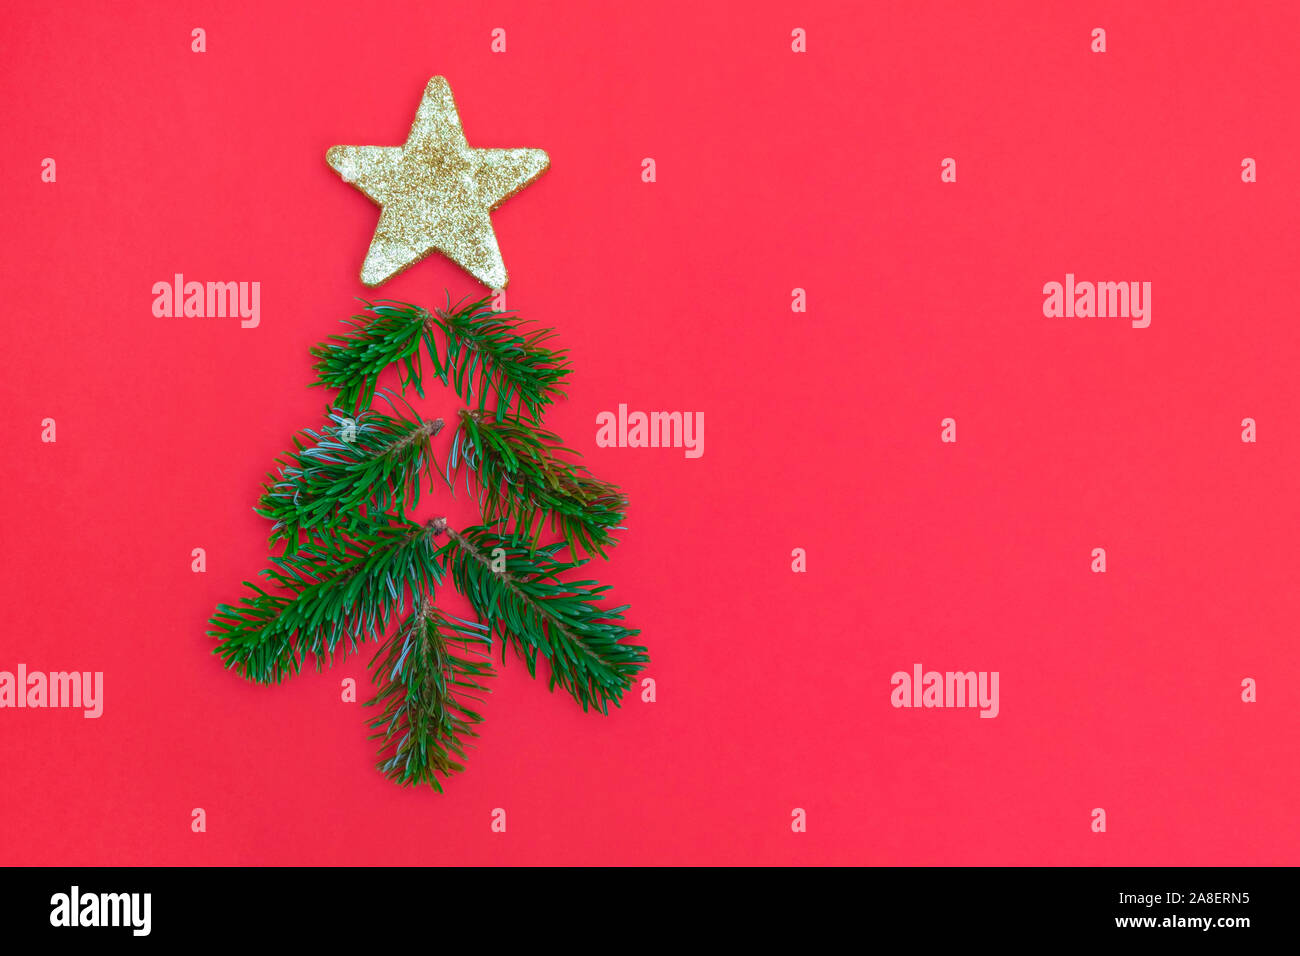 Creative Christmas tree made of pine tree branches and golden star on red background Stock Photo